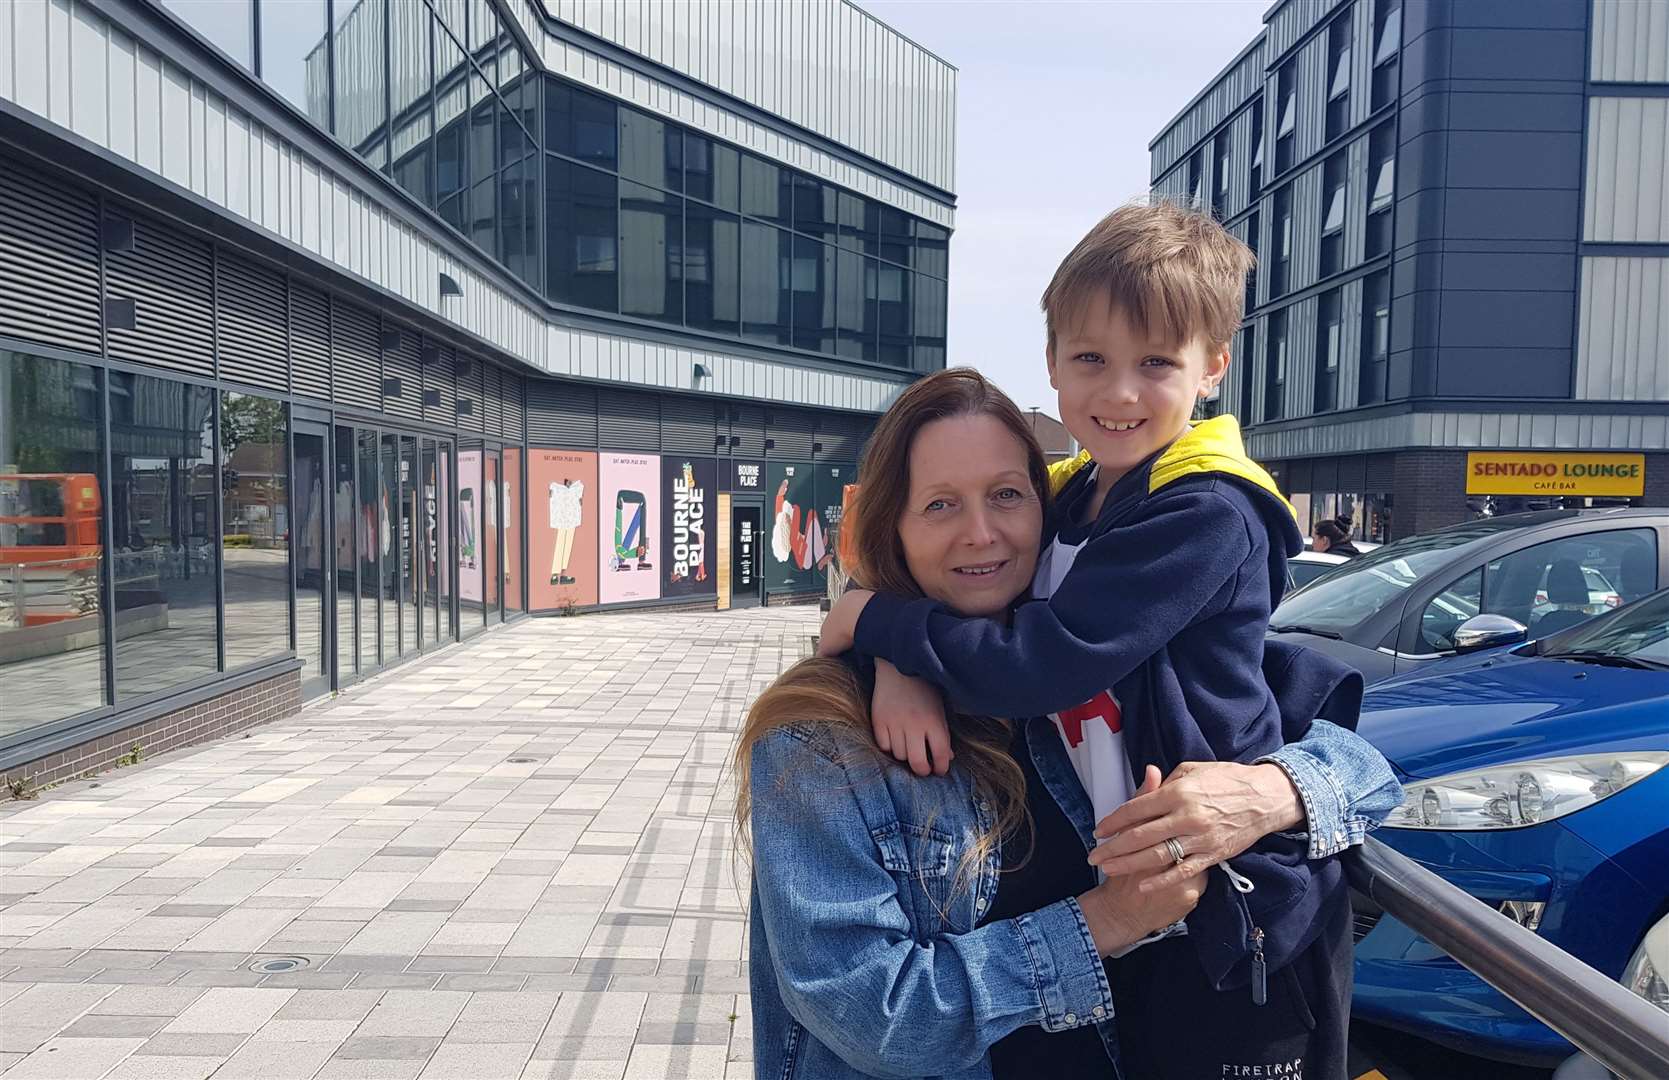 Rosalyn Dobell, 56, with grandson Bobby Watts, seven, were one of the first visitors to The Light cinema complex in Sittingbourne